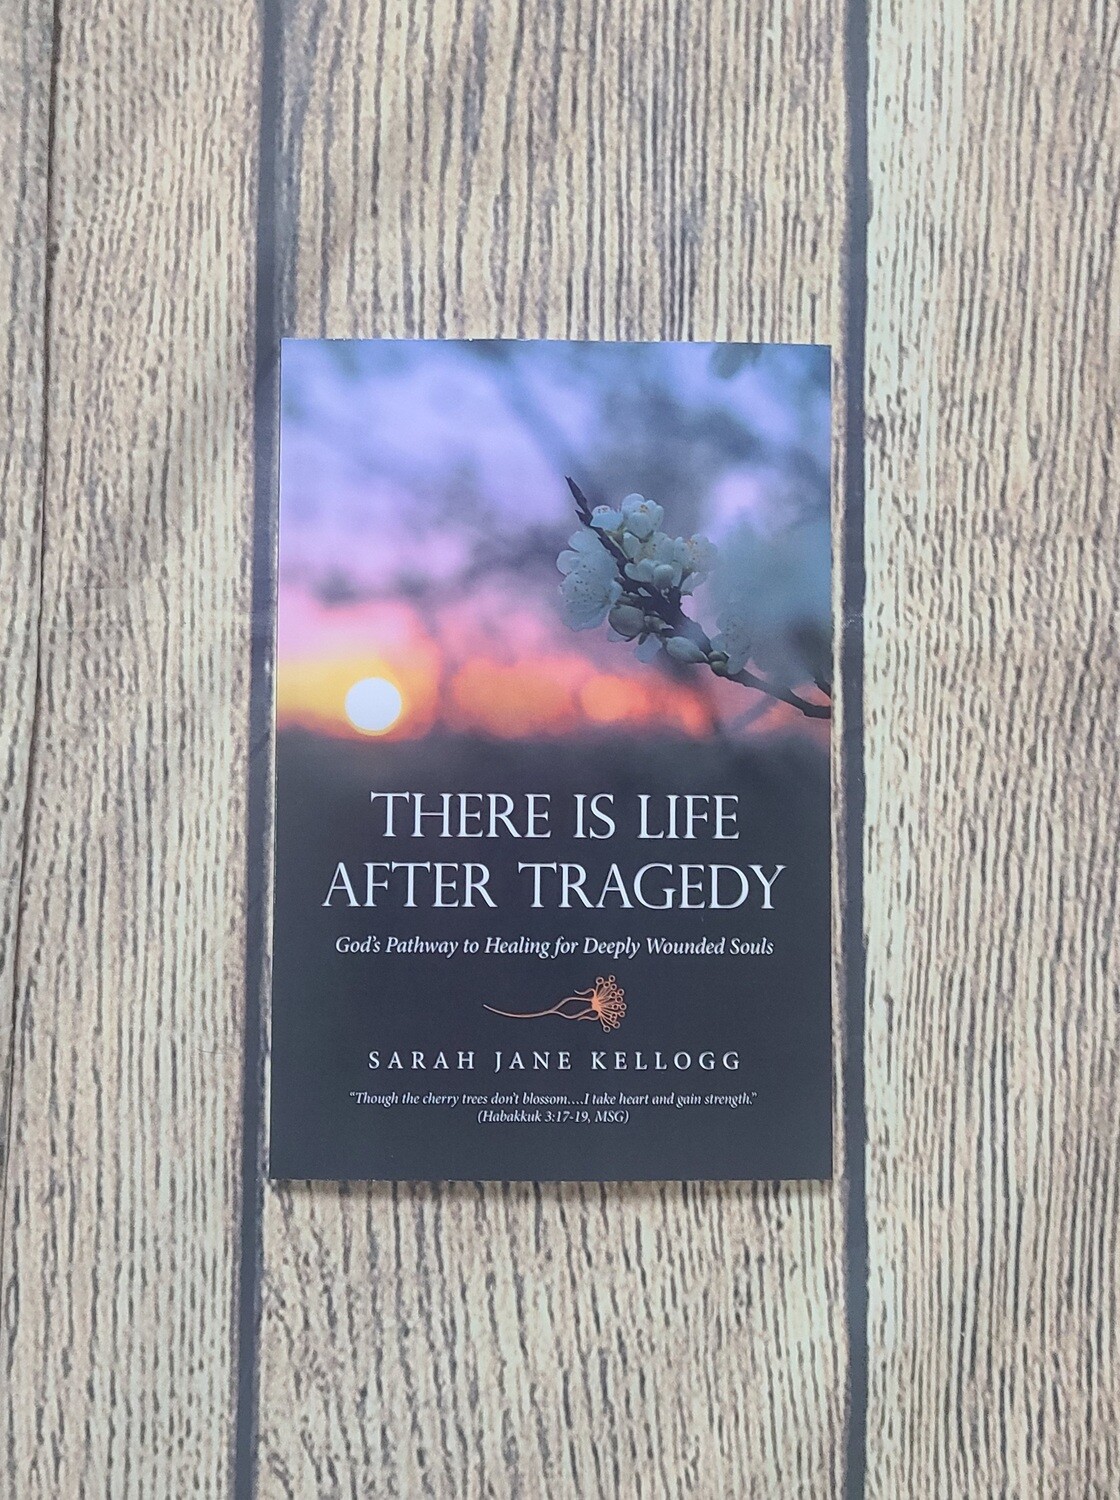 There is Life After Tragedy: God's Pathway to Healing for Deeply Wounded Souls by Sarah Jane Kellogg - Paperback - New